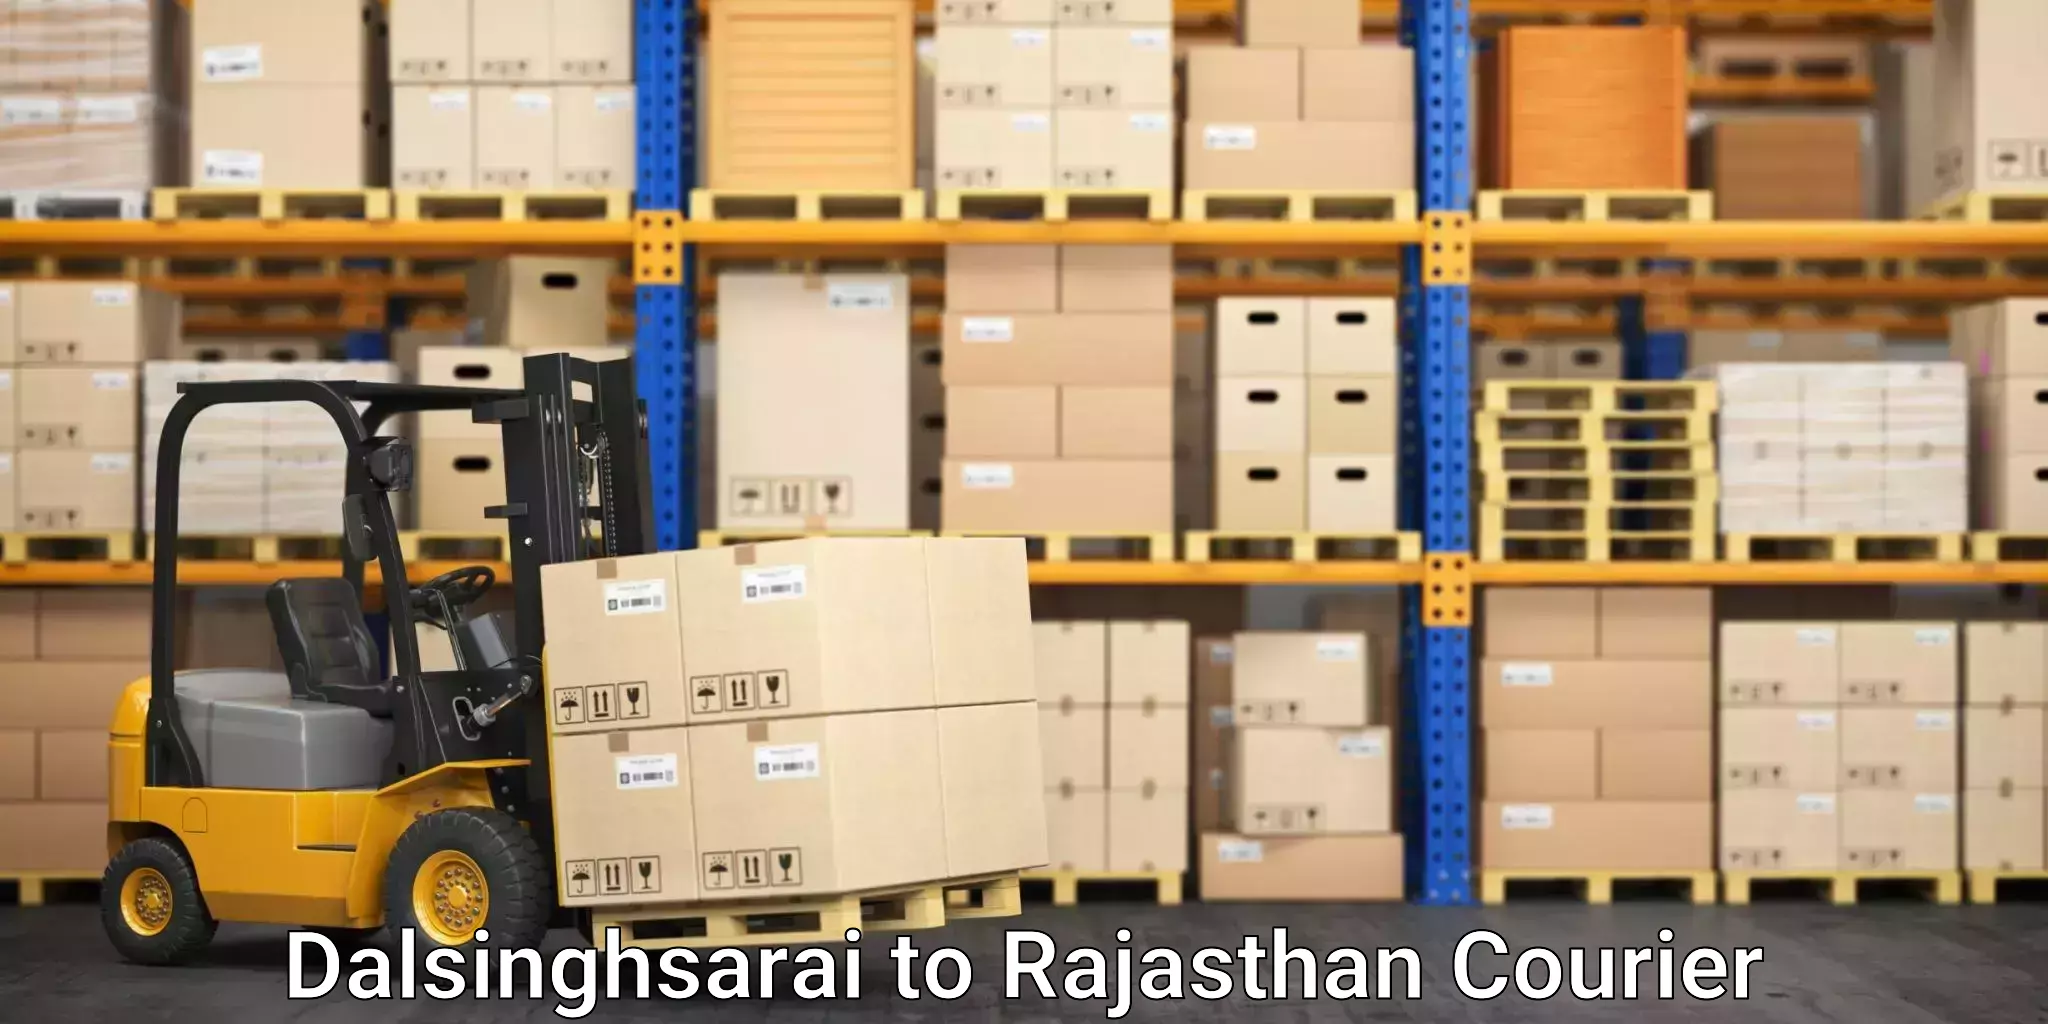 Professional furniture movers Dalsinghsarai to Rajasthan